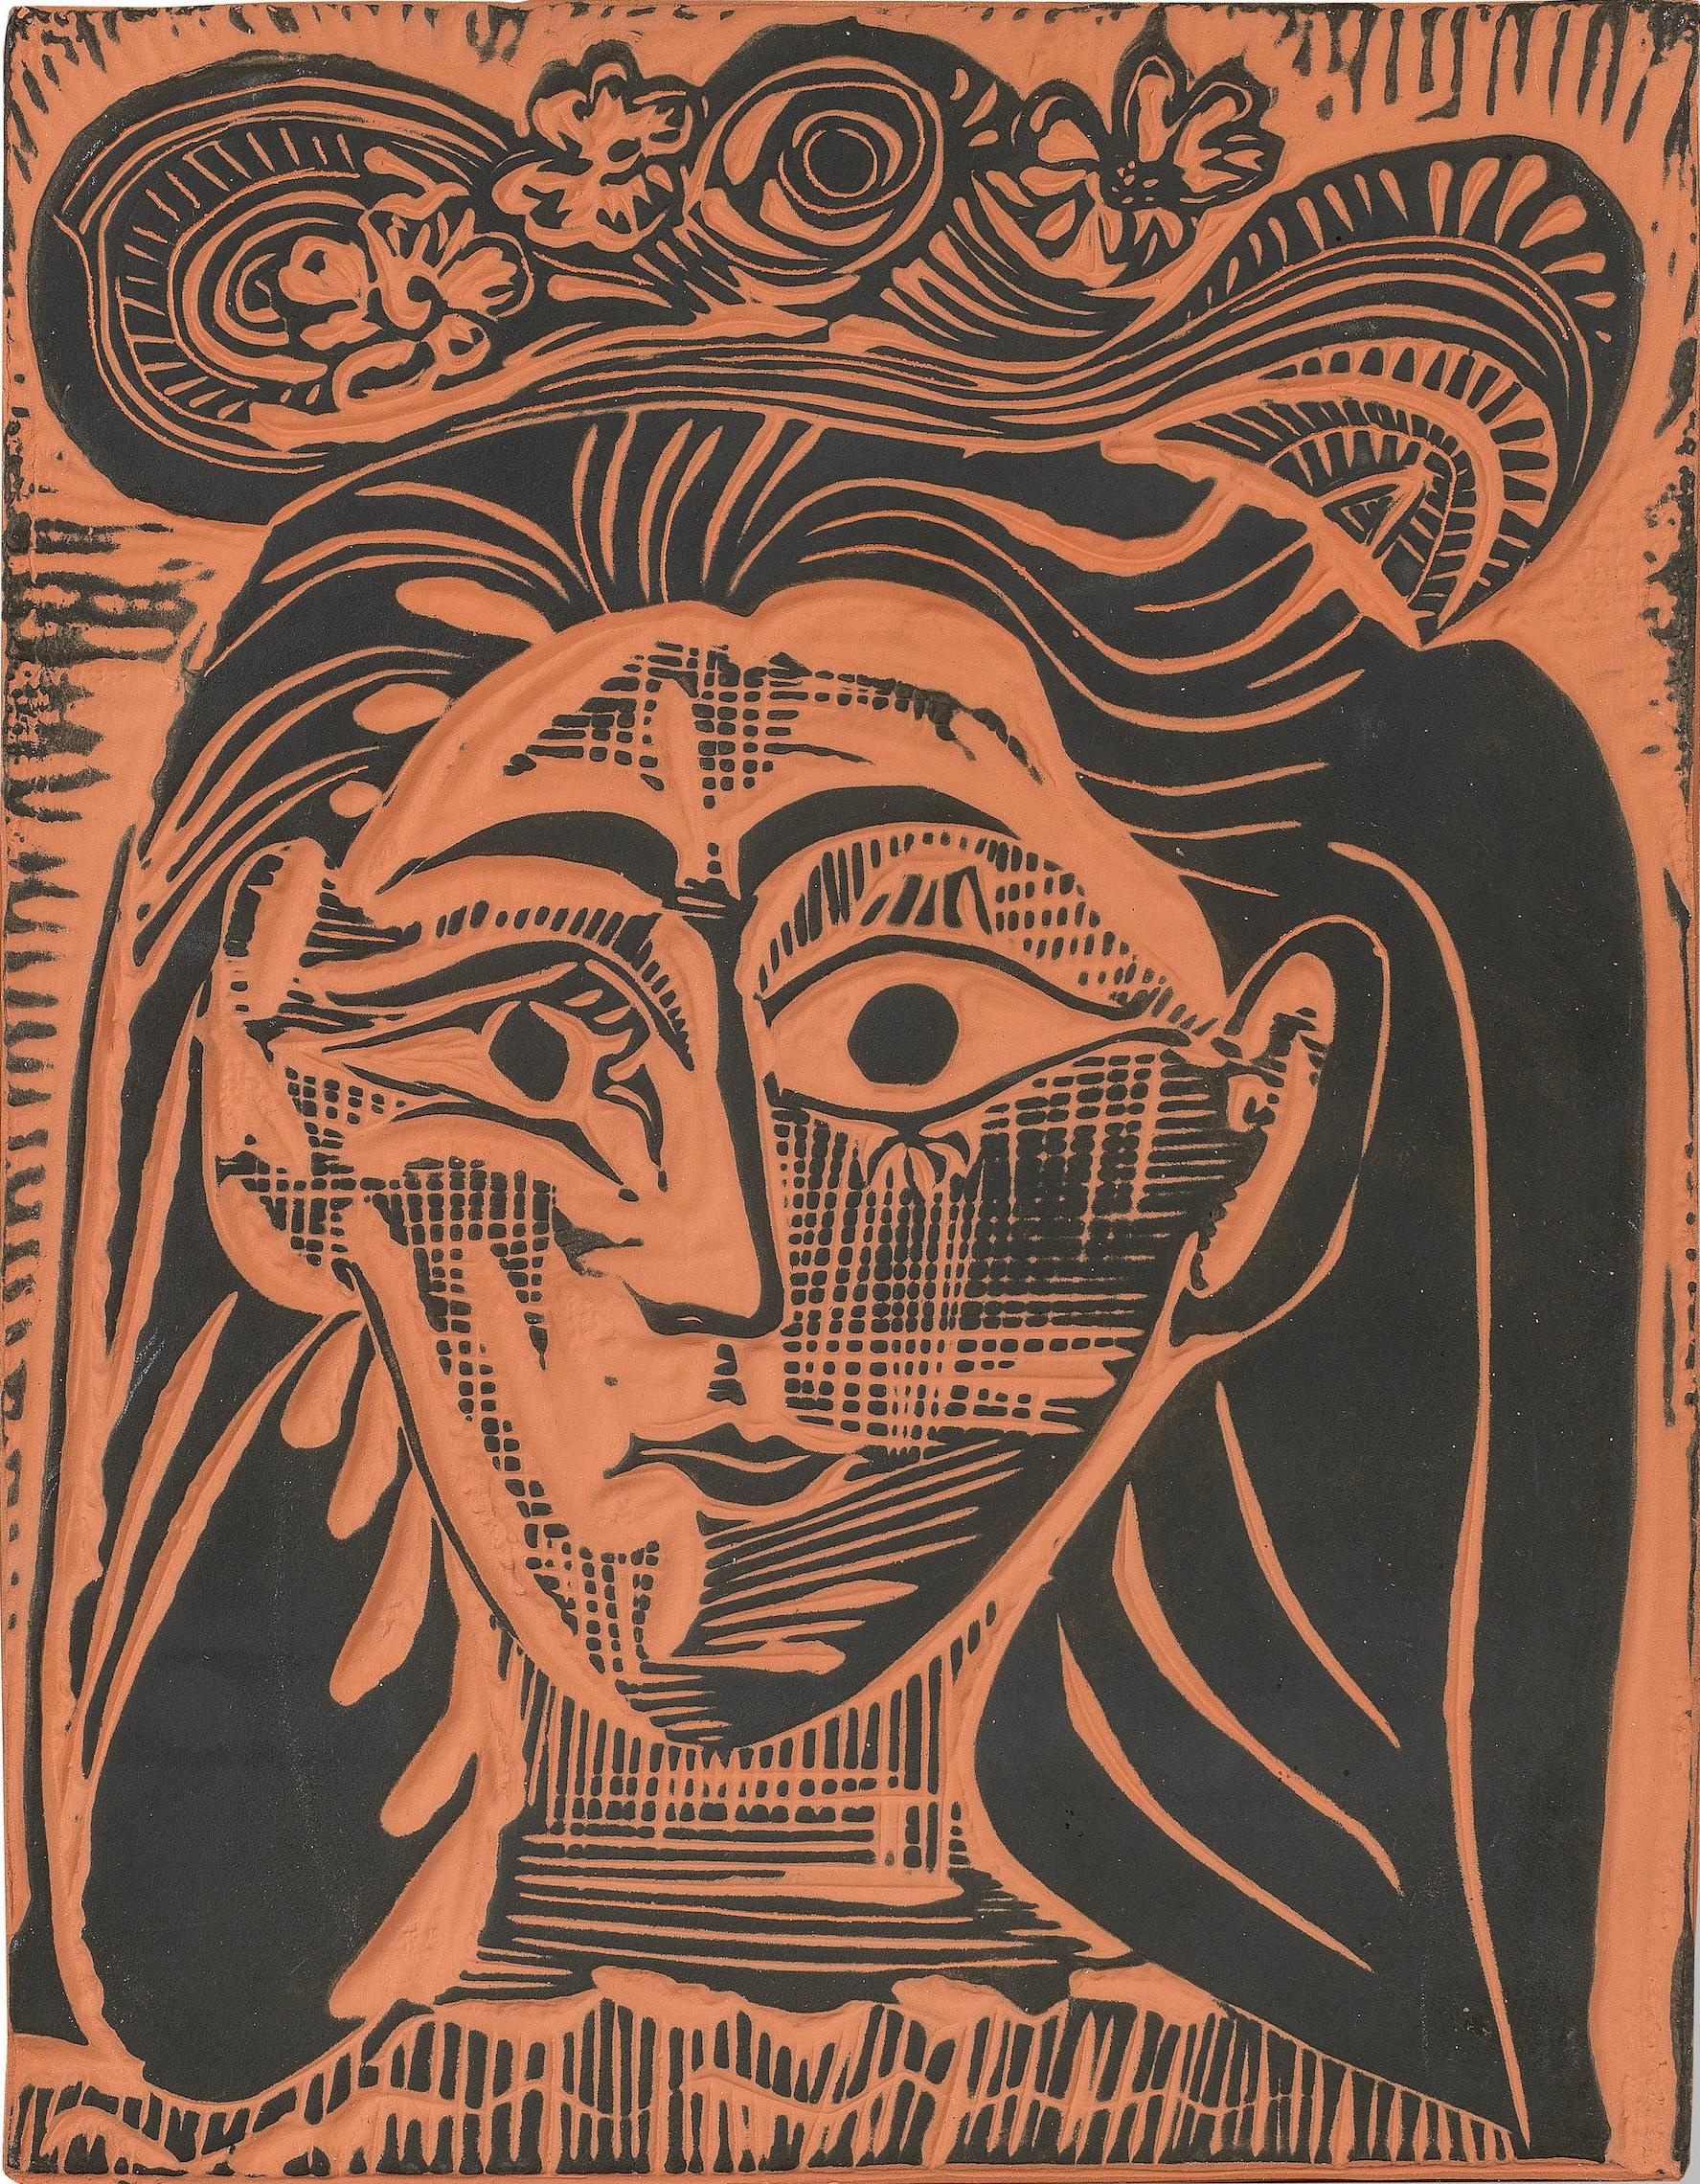 PABLO PICASSO (1881-1973)
Femme au chapeau fleuri (A.R. 521)
stamped and numbered 'Madoura Plein Feu / Empreinte Originale de Picasso / 97/100' (on the reverse)
terracotta plaque, partially engraved, with black engobe
12-7/8 x 10 in. (33 x 25.5